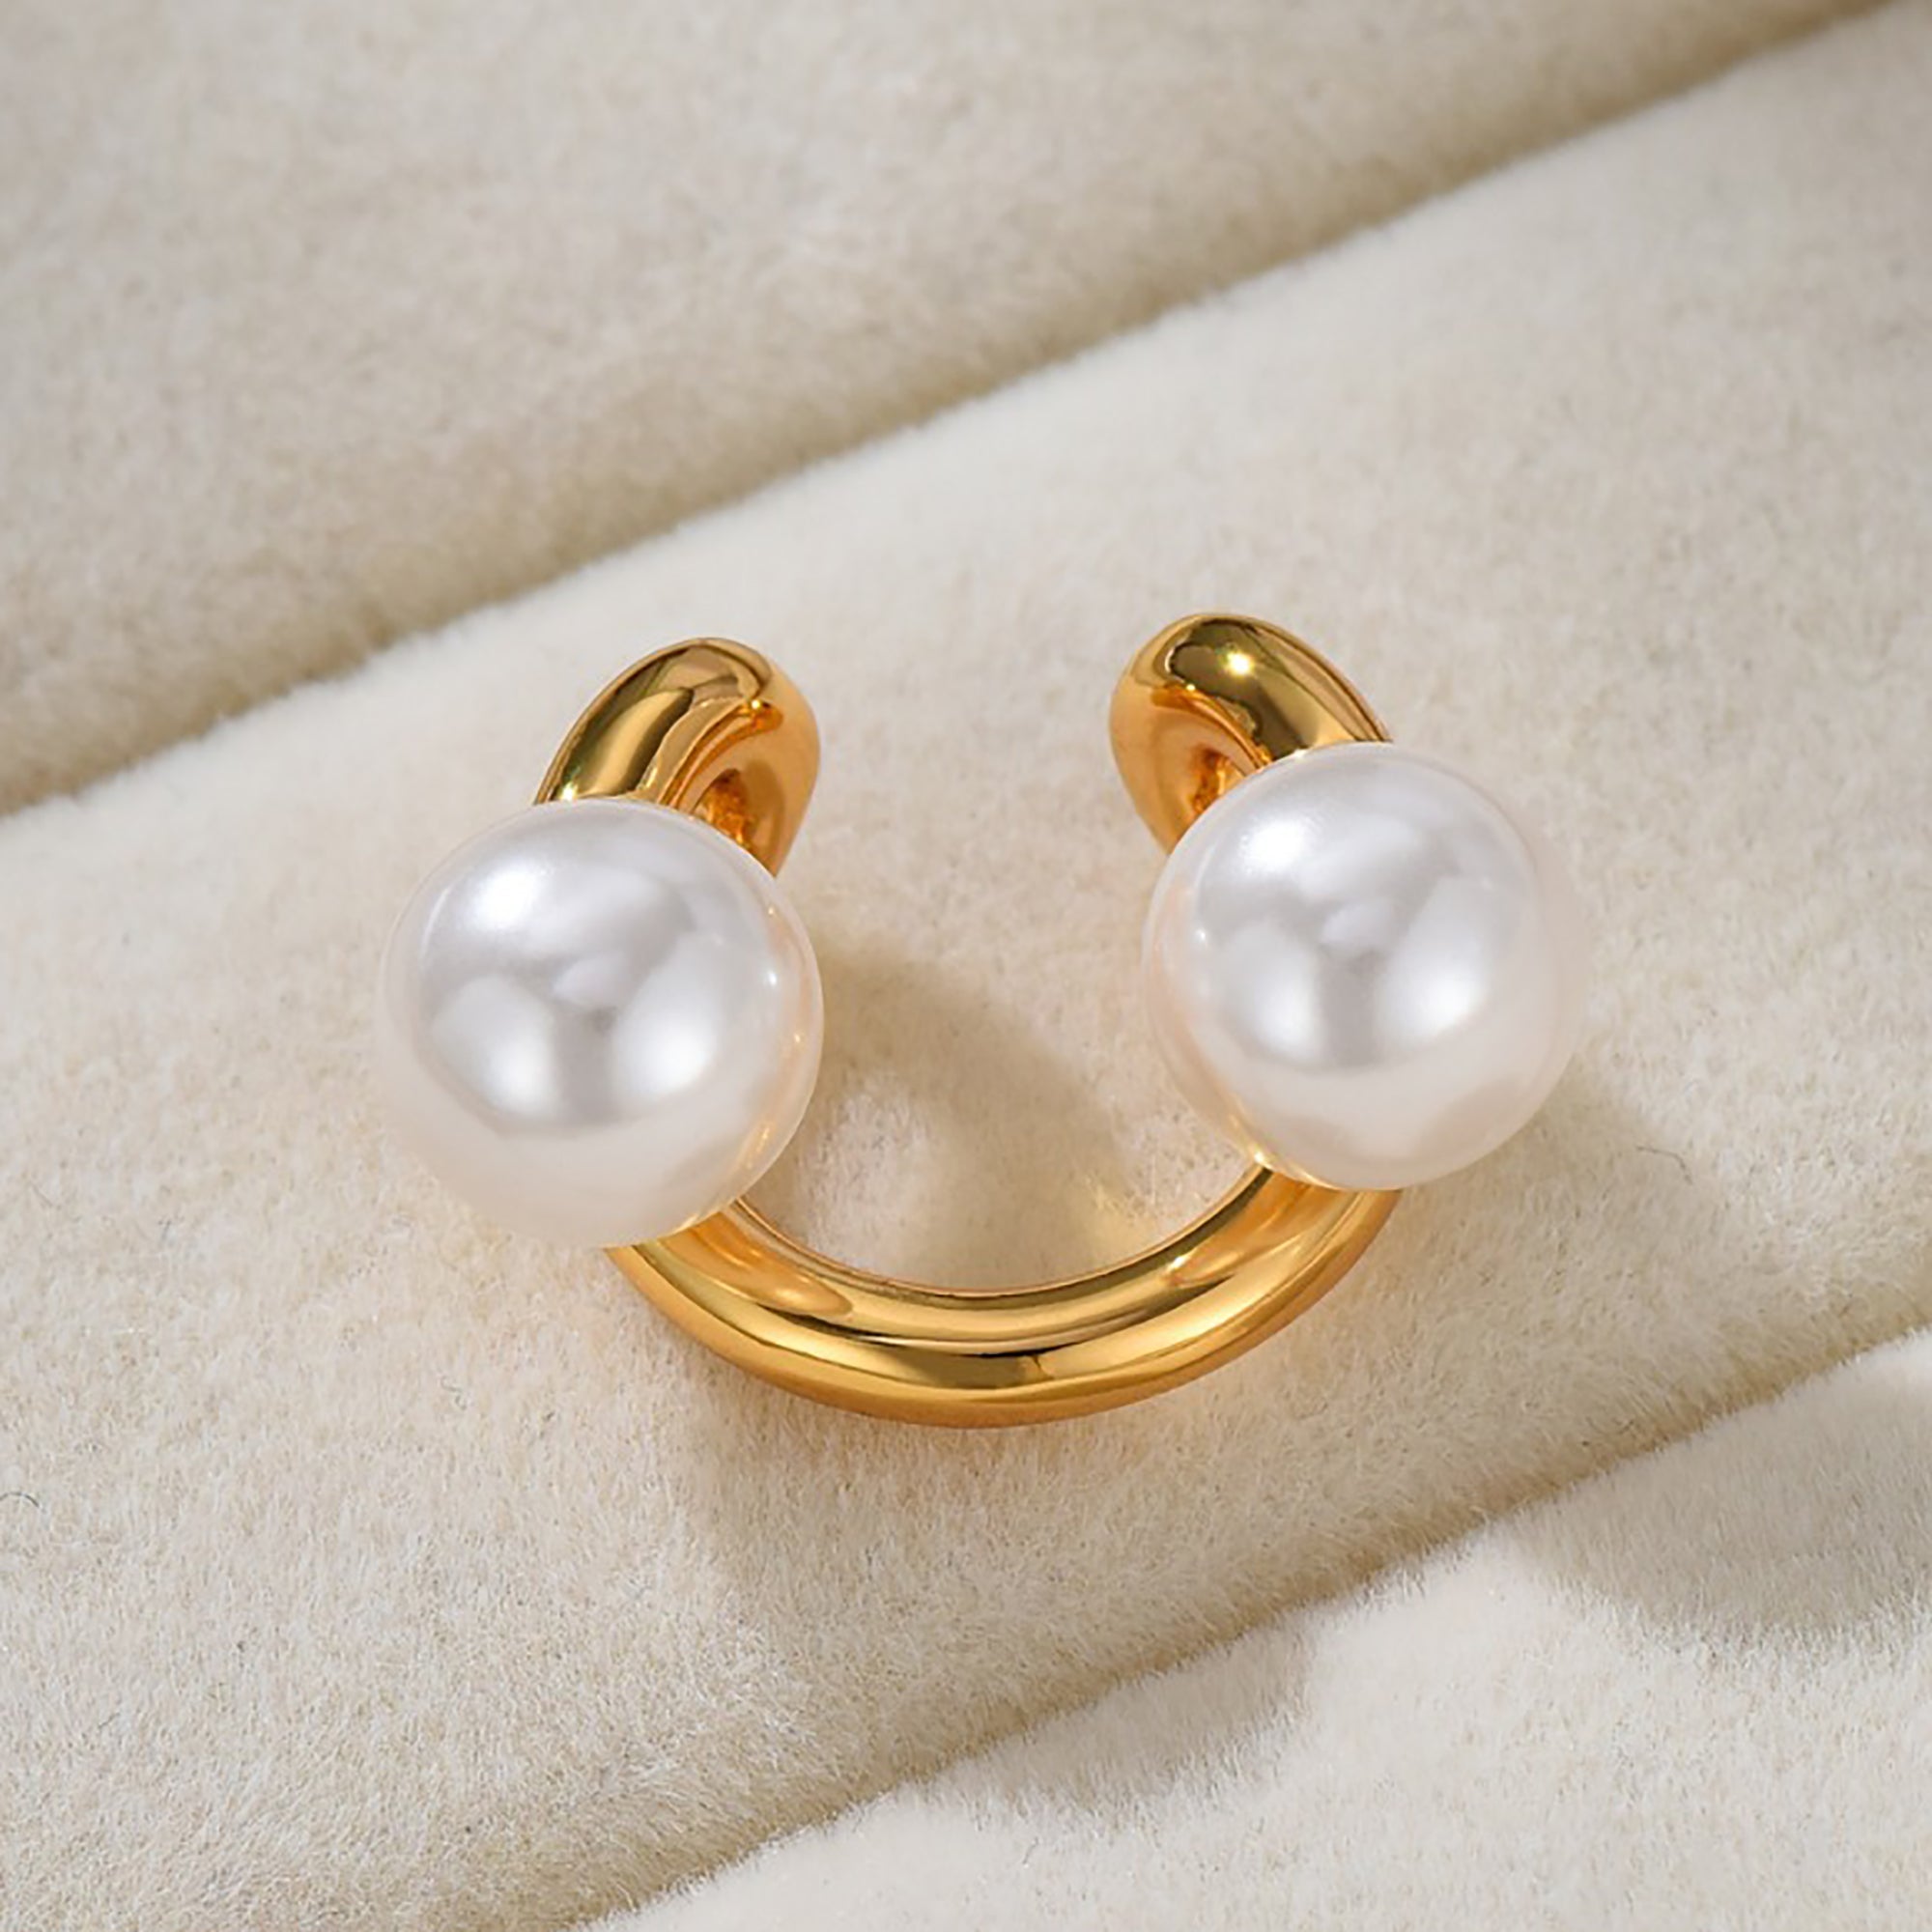 Gold Plated w/ Pearl Ear Cuff Suspender Earrings Valentine Day Gift